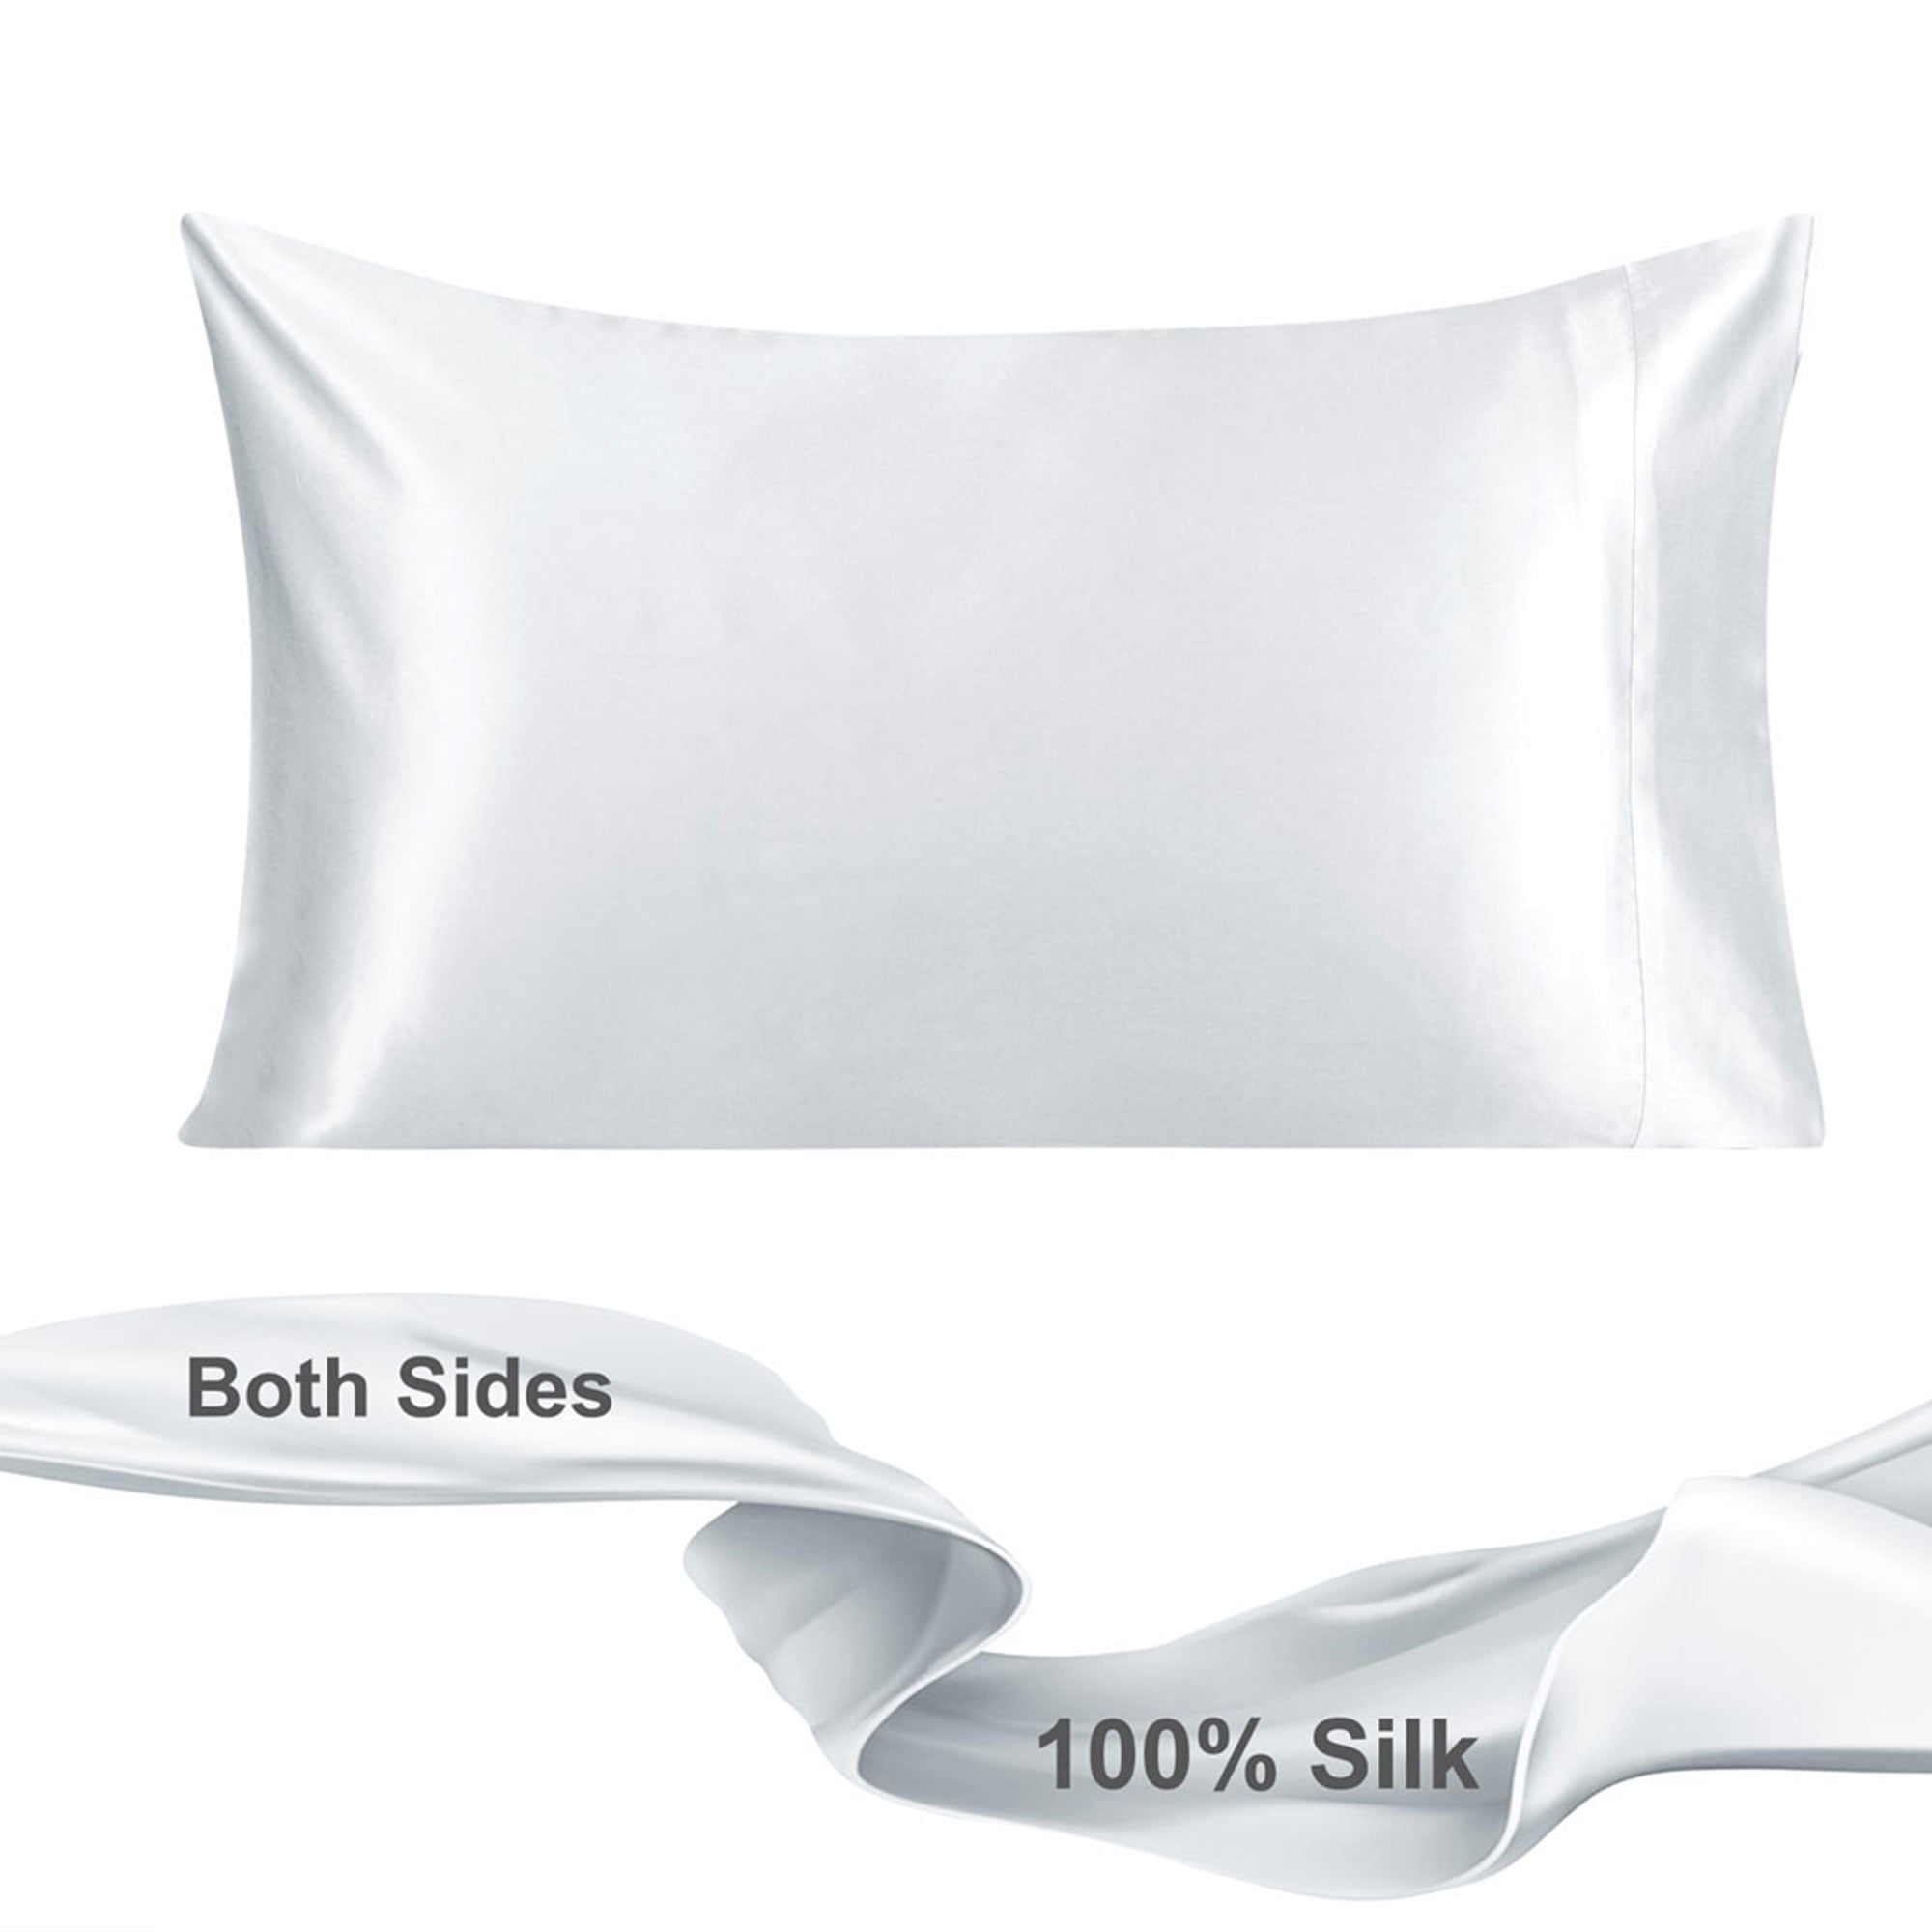 US Silk Pillow Cases Cushion Covers For Hair Facial Beauty by Feeling Pampered 